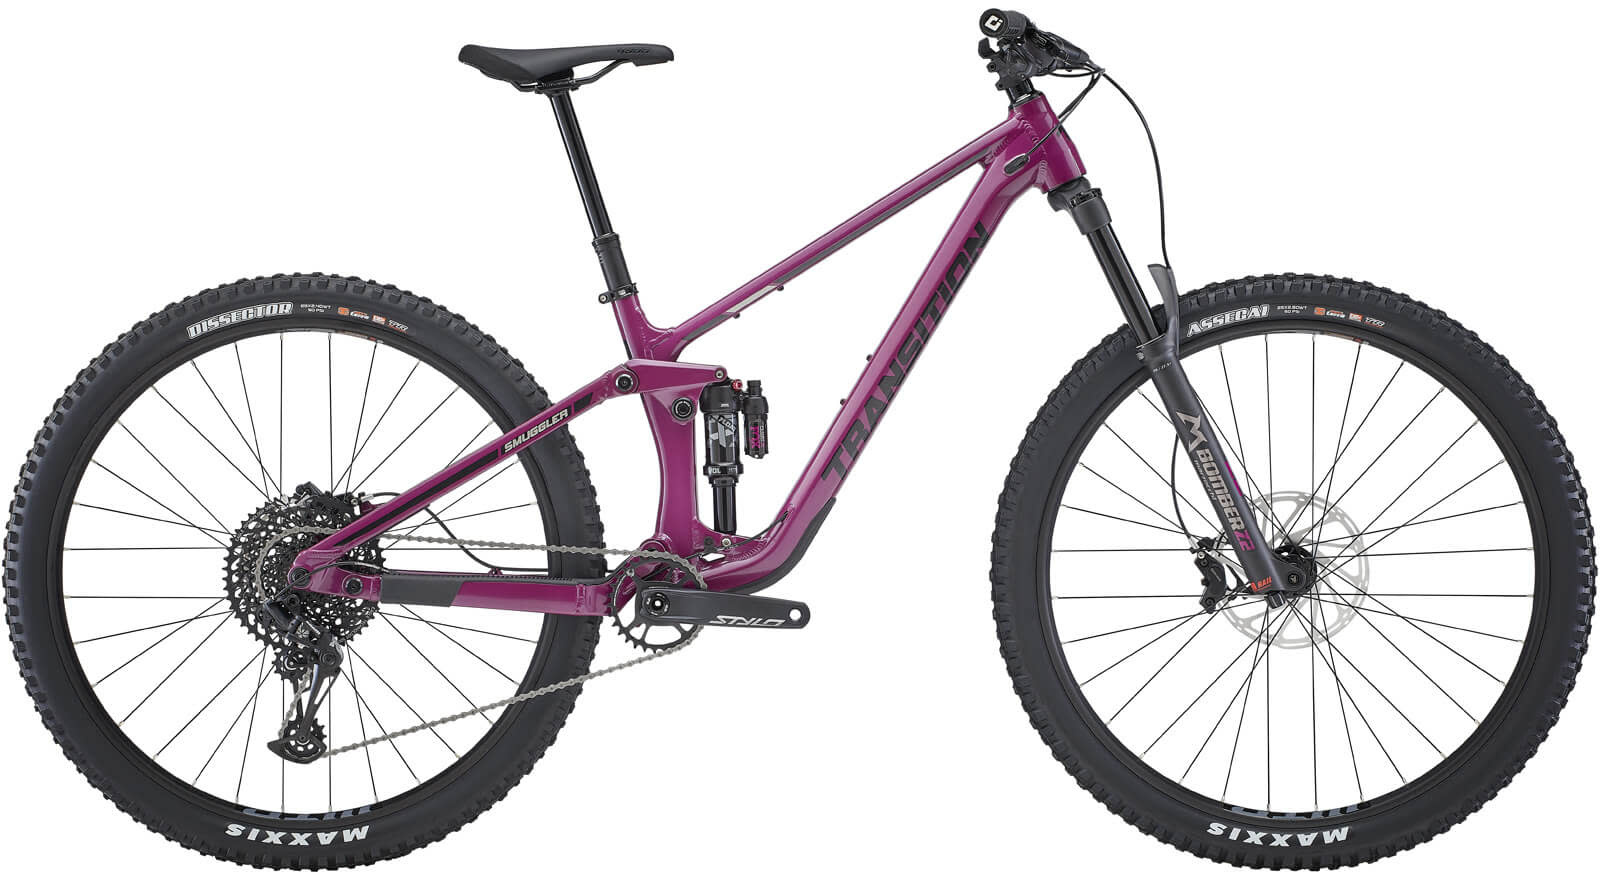 Transition Transition Smuggler Alloy NX (Large, Orchid)